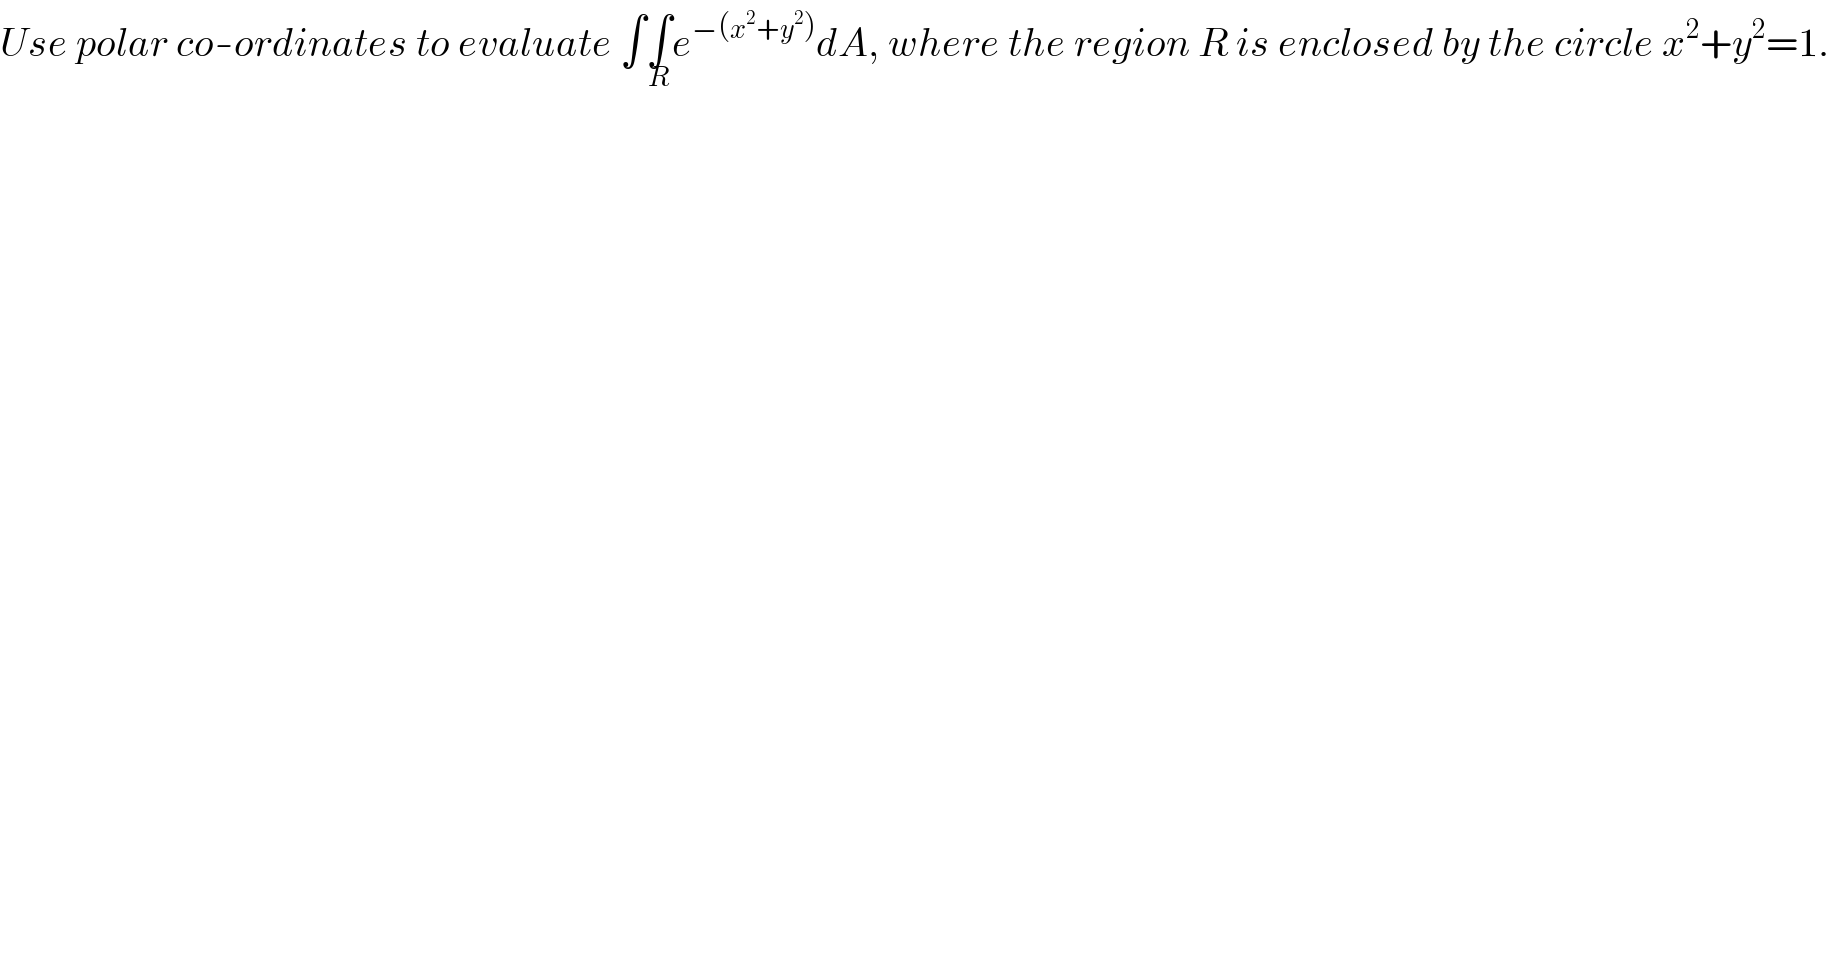 Use polar co-ordinates to evaluate ∫∫_R e^(−(x^2 +y^2 )) dA, where the region R is enclosed by the circle x^2 +y^2 =1.  